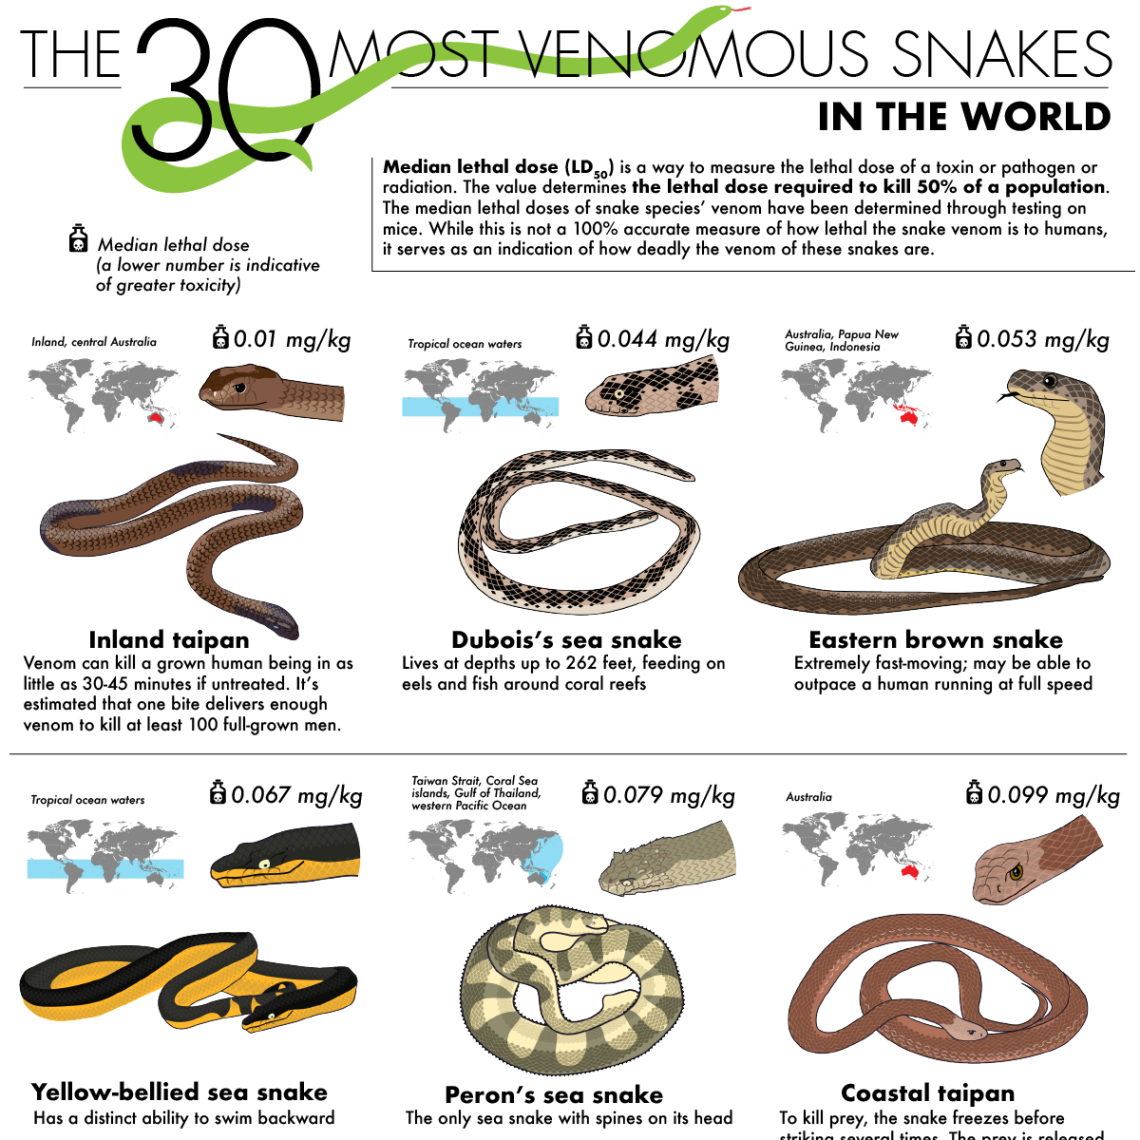 How many venomous snakes are there?